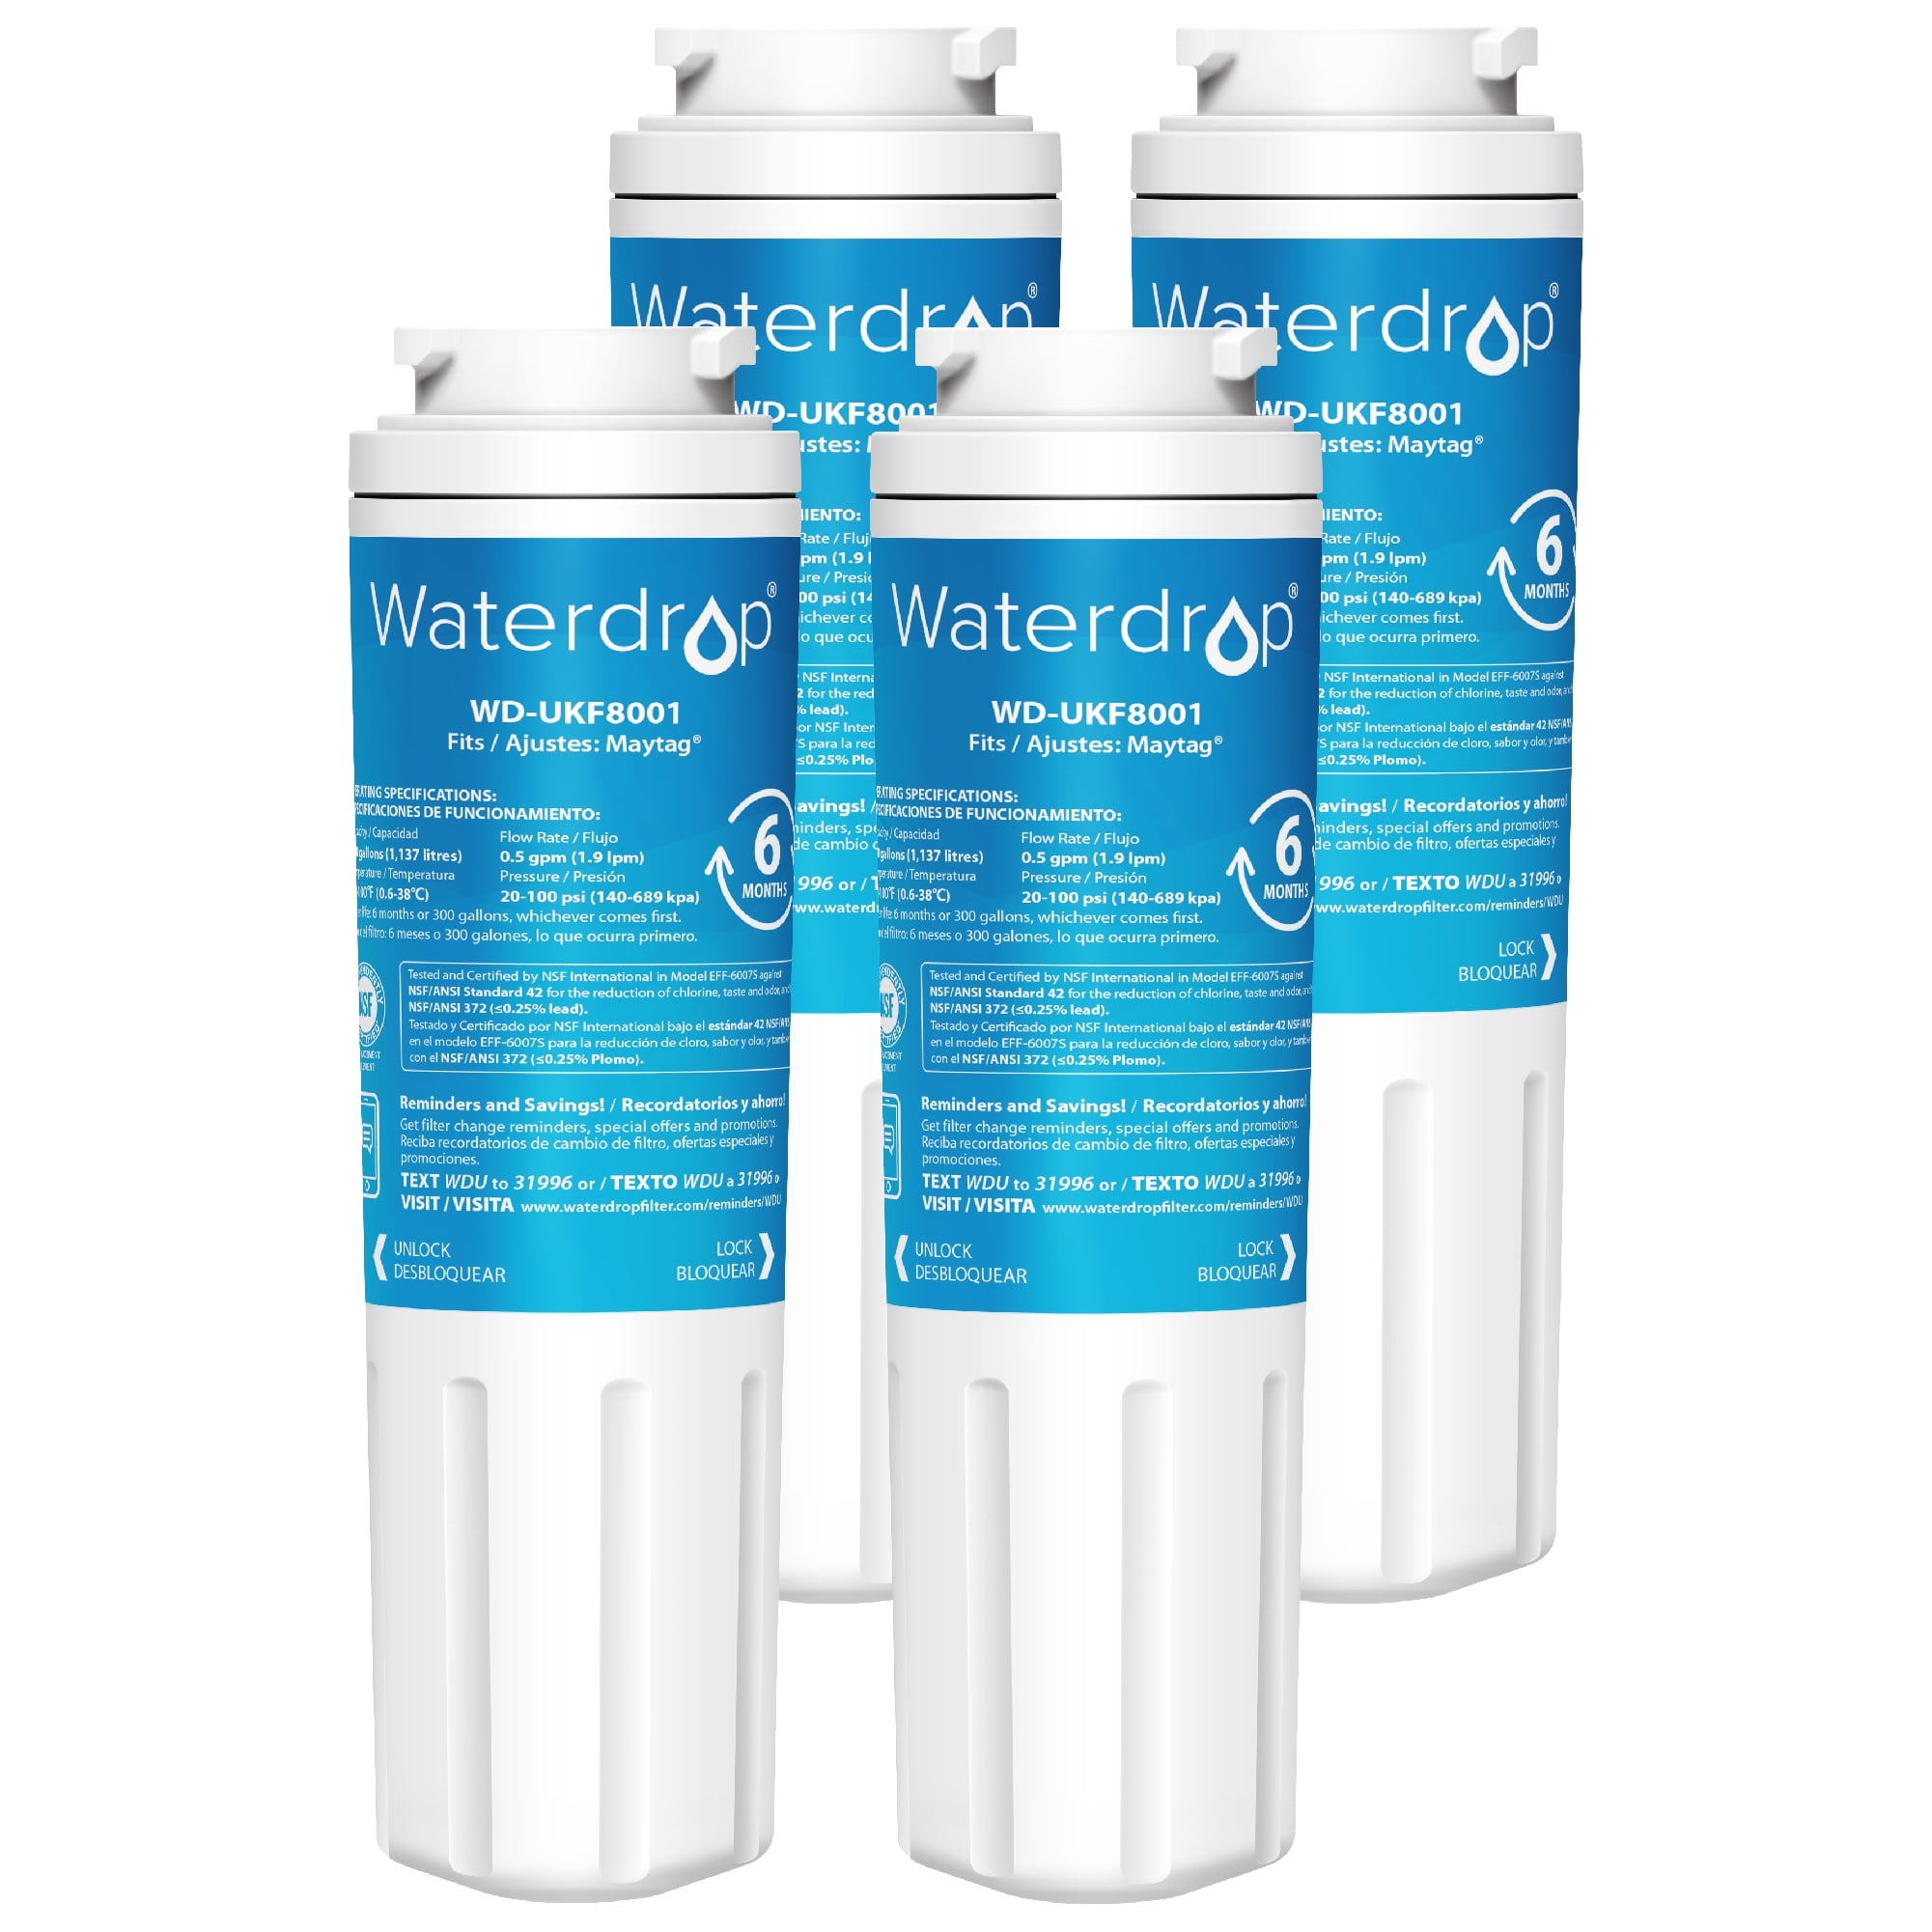 Waterdrop UKF8001 Water Filter, Replacement for EveryDrop Filter 4,  EDR4RXD1, Whirlpool UKF8001AXX-750, Maytag UKF8001P, UKF8001AXX-200,  4396395, 46-9005, 46-9006, Puriclean II (Pack of 4) 